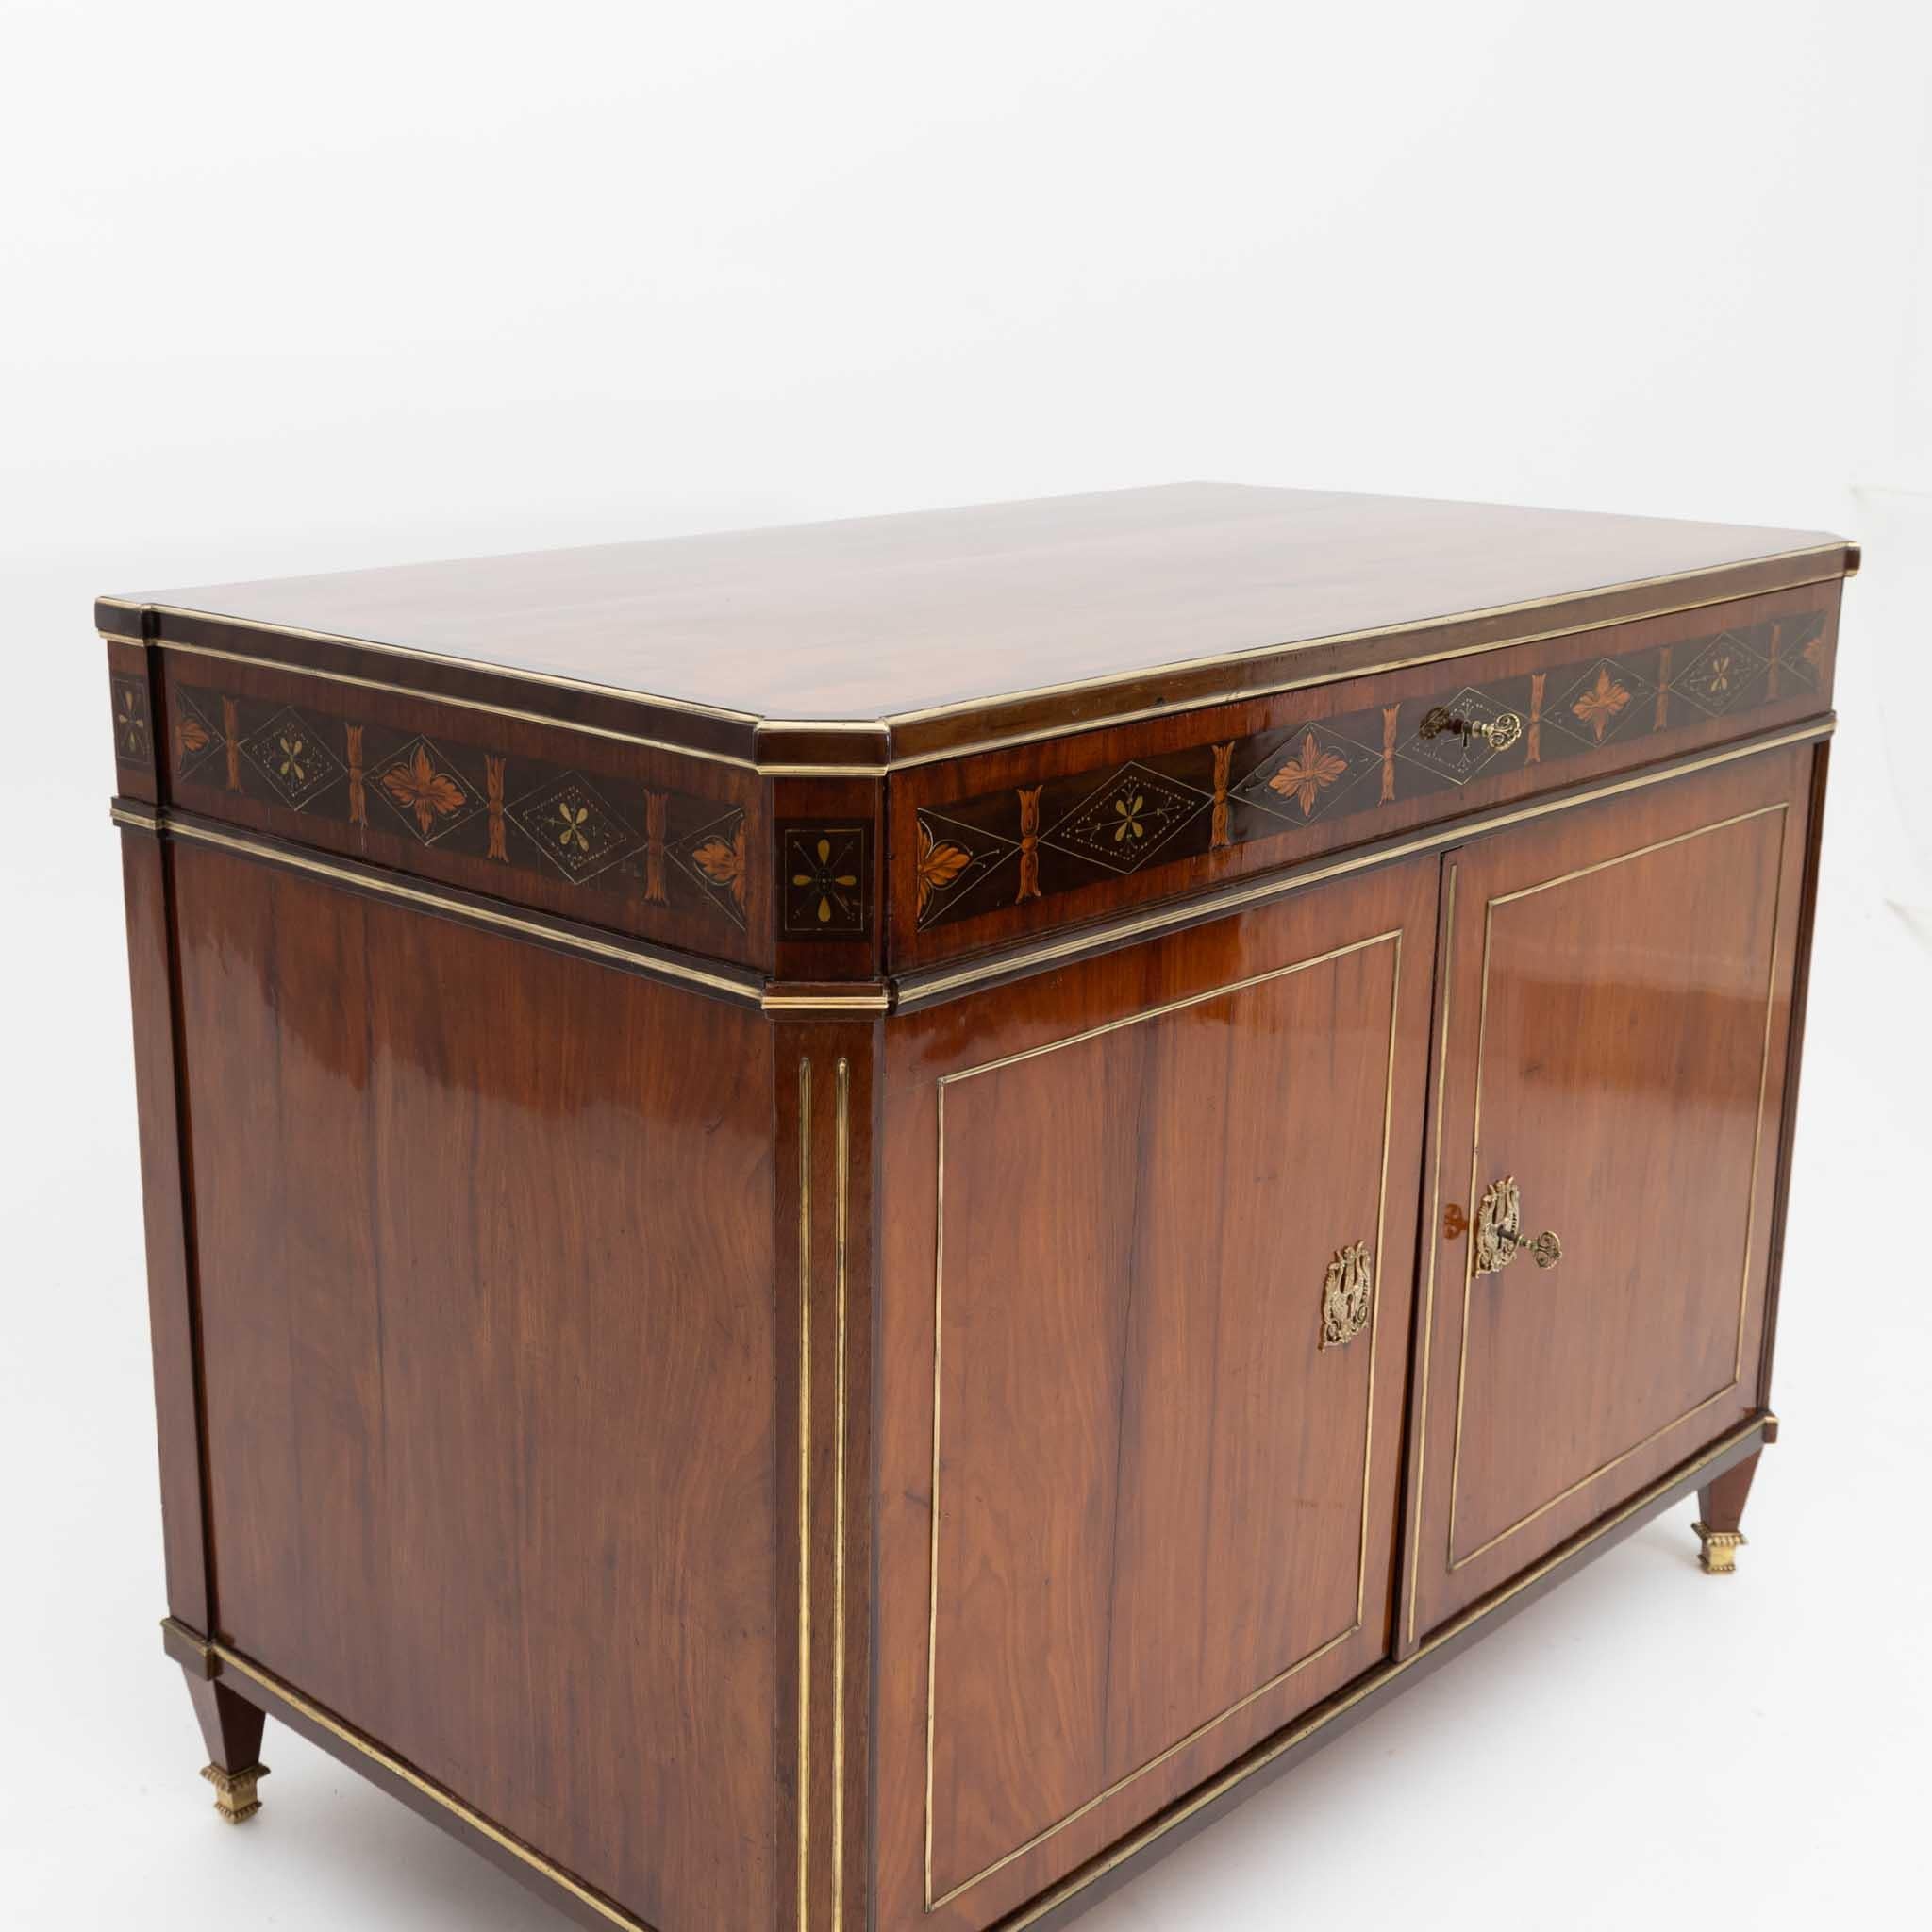 Austrian Empire Sideboard, Vienna early 19th Century For Sale